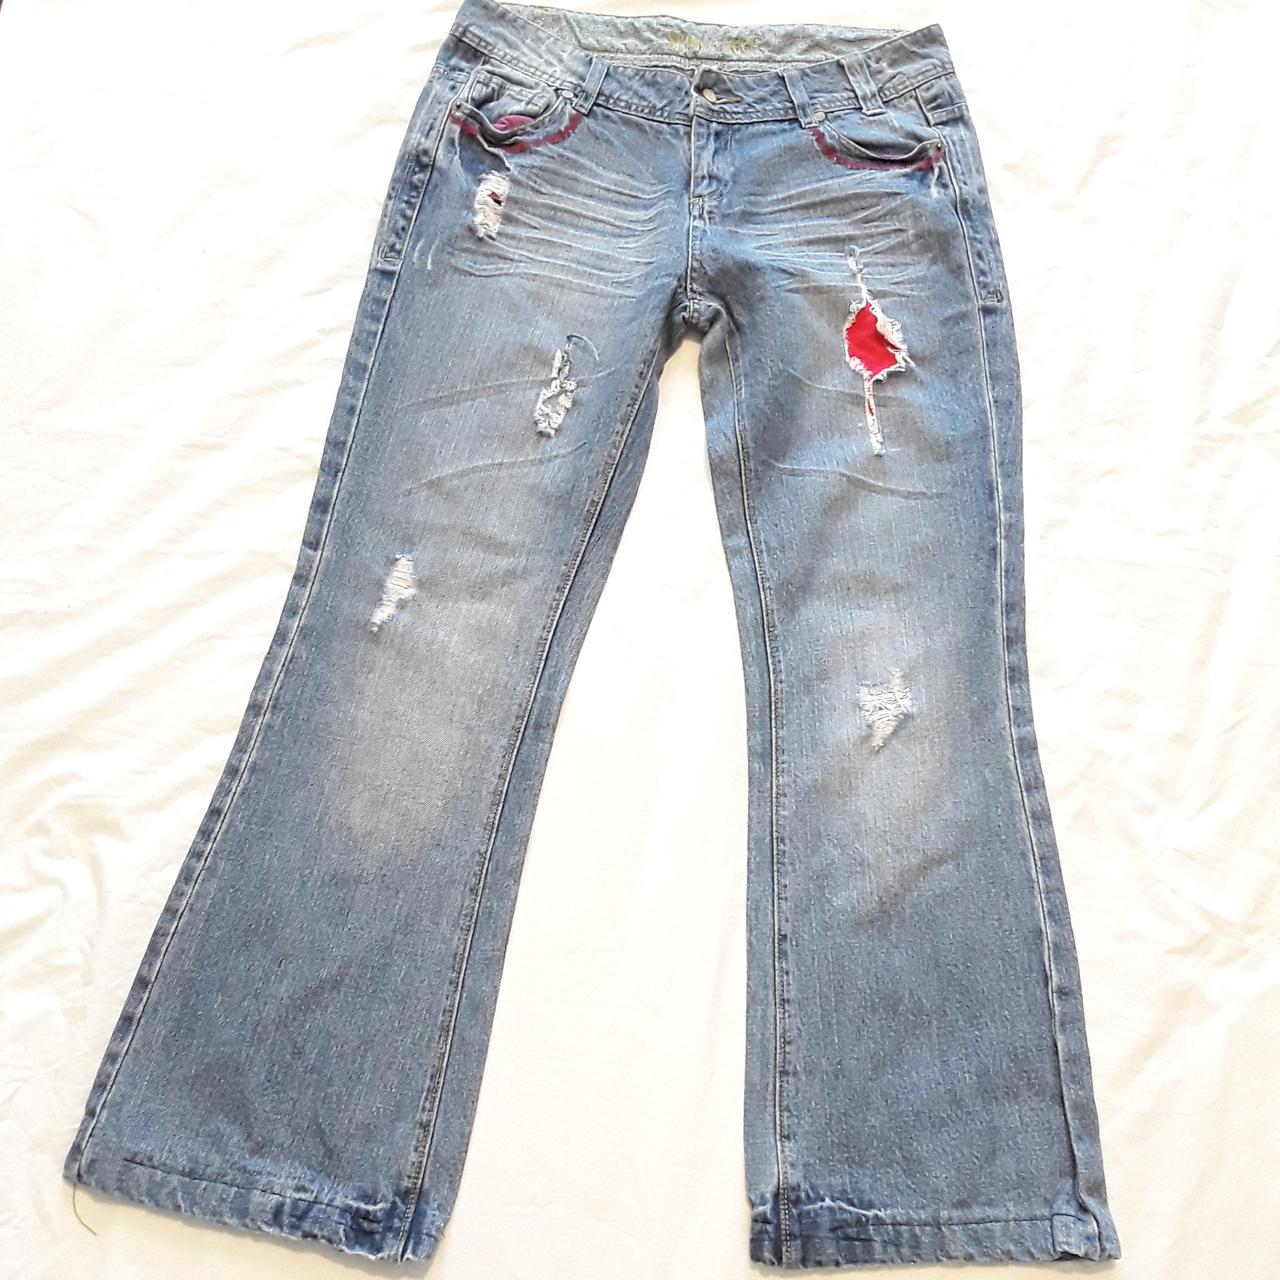 Denim & Co. Women's Red and Blue Jeans | Depop